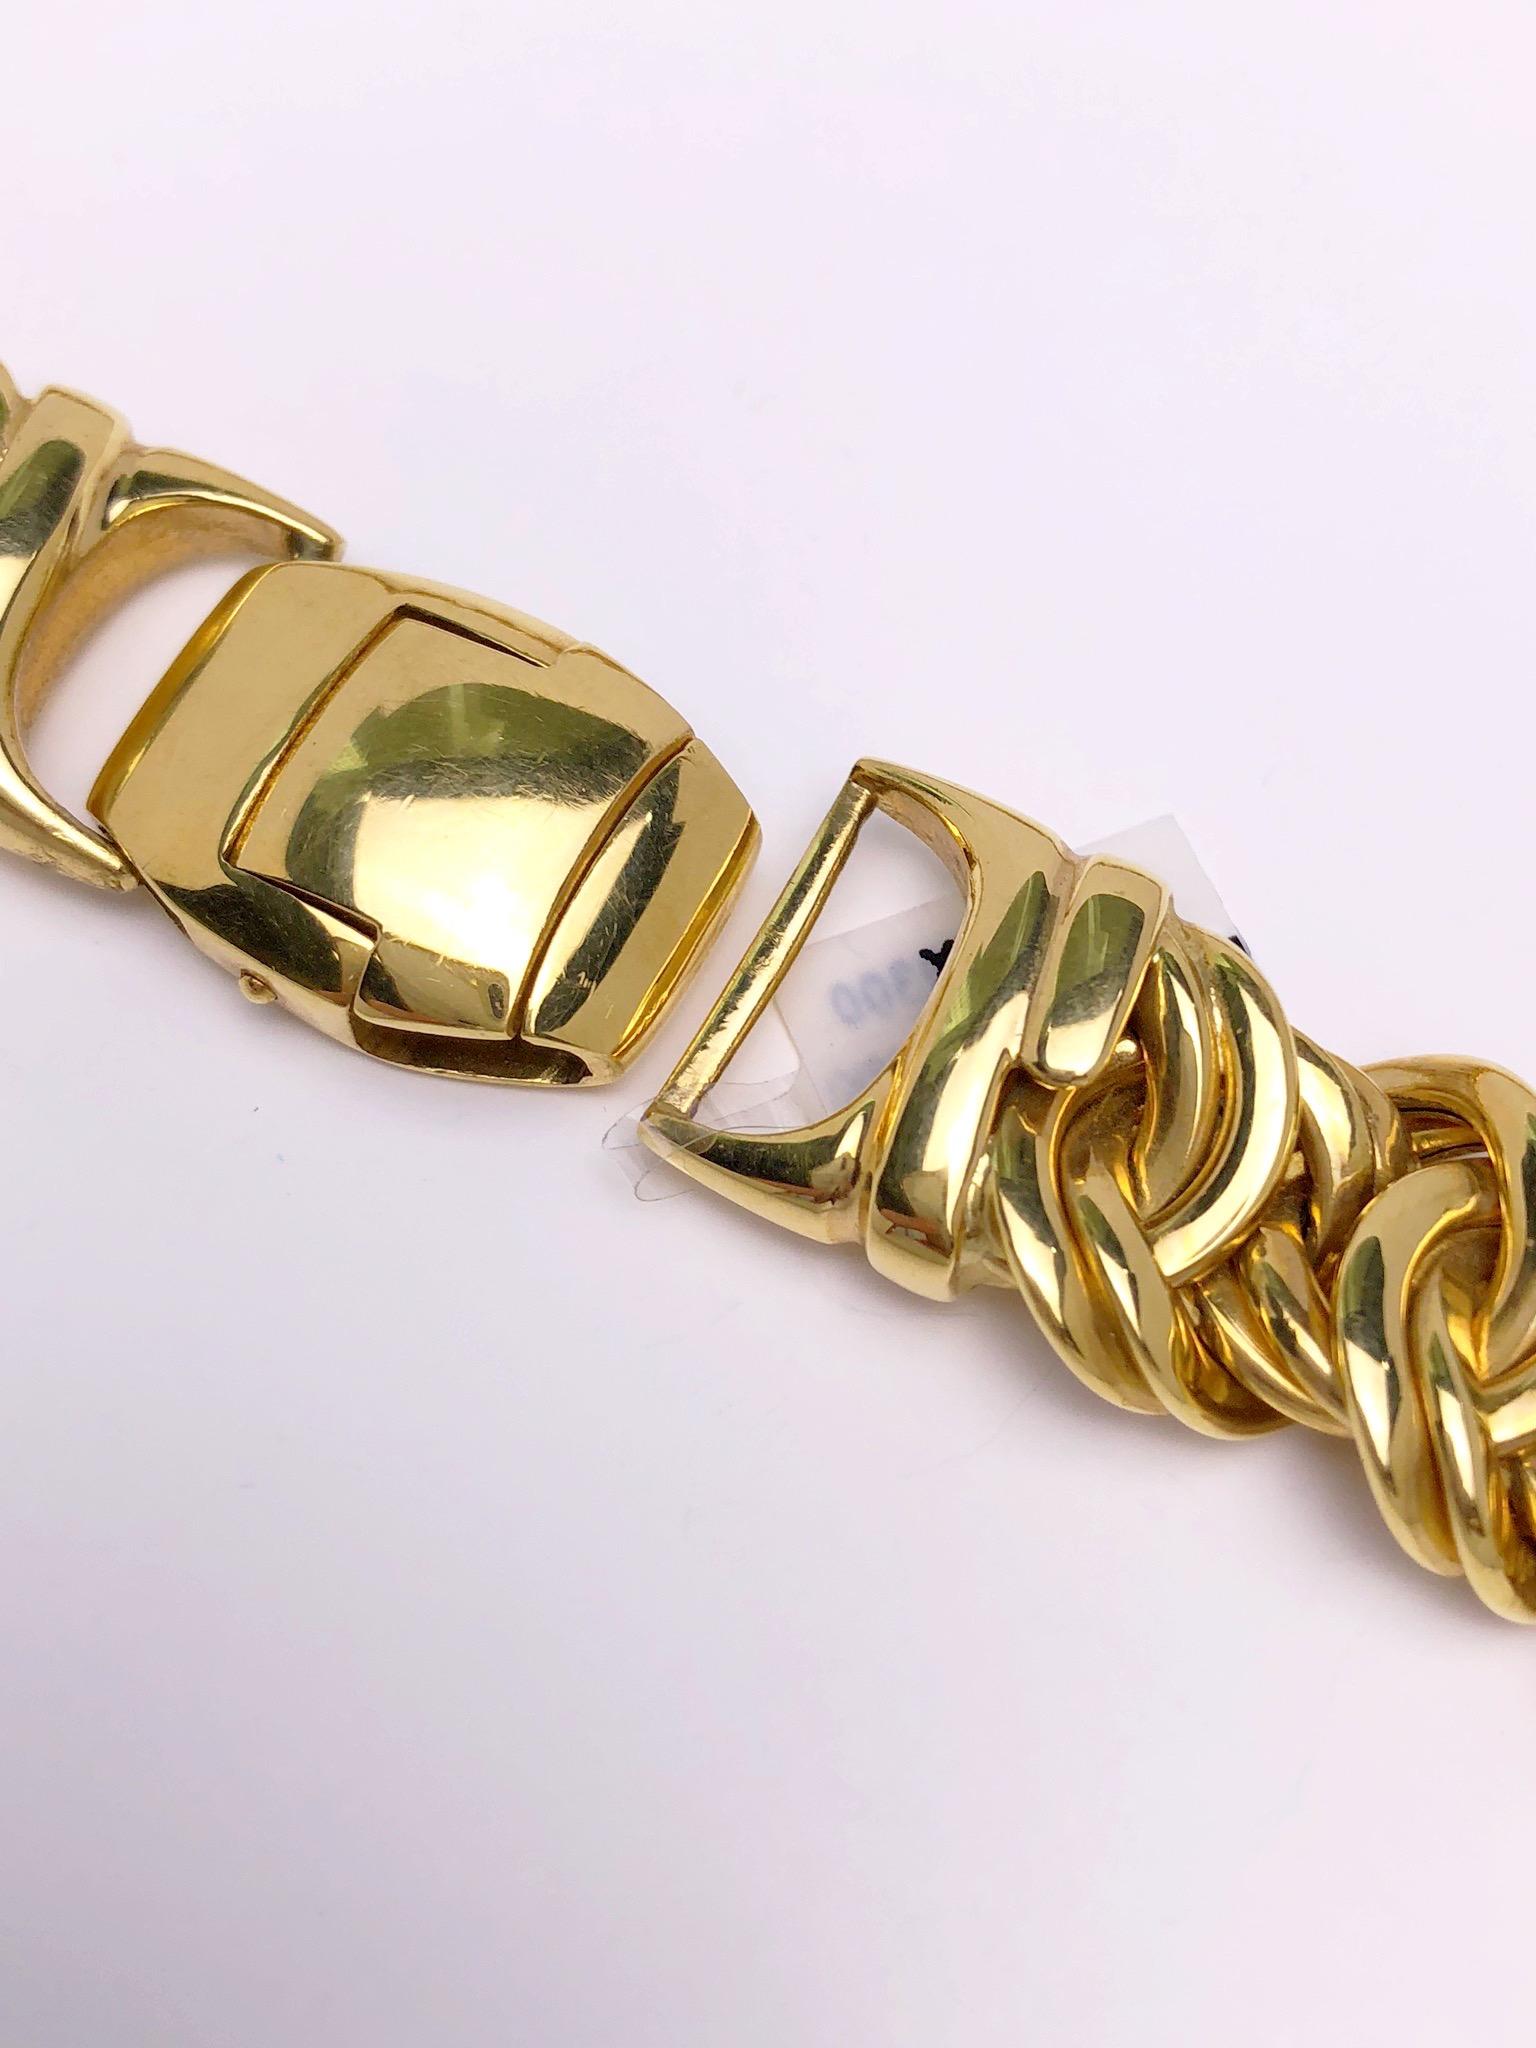 Retro Roberto Coin 1990s 18 Karat Yellow Gold Double Knot Chain Link Necklace